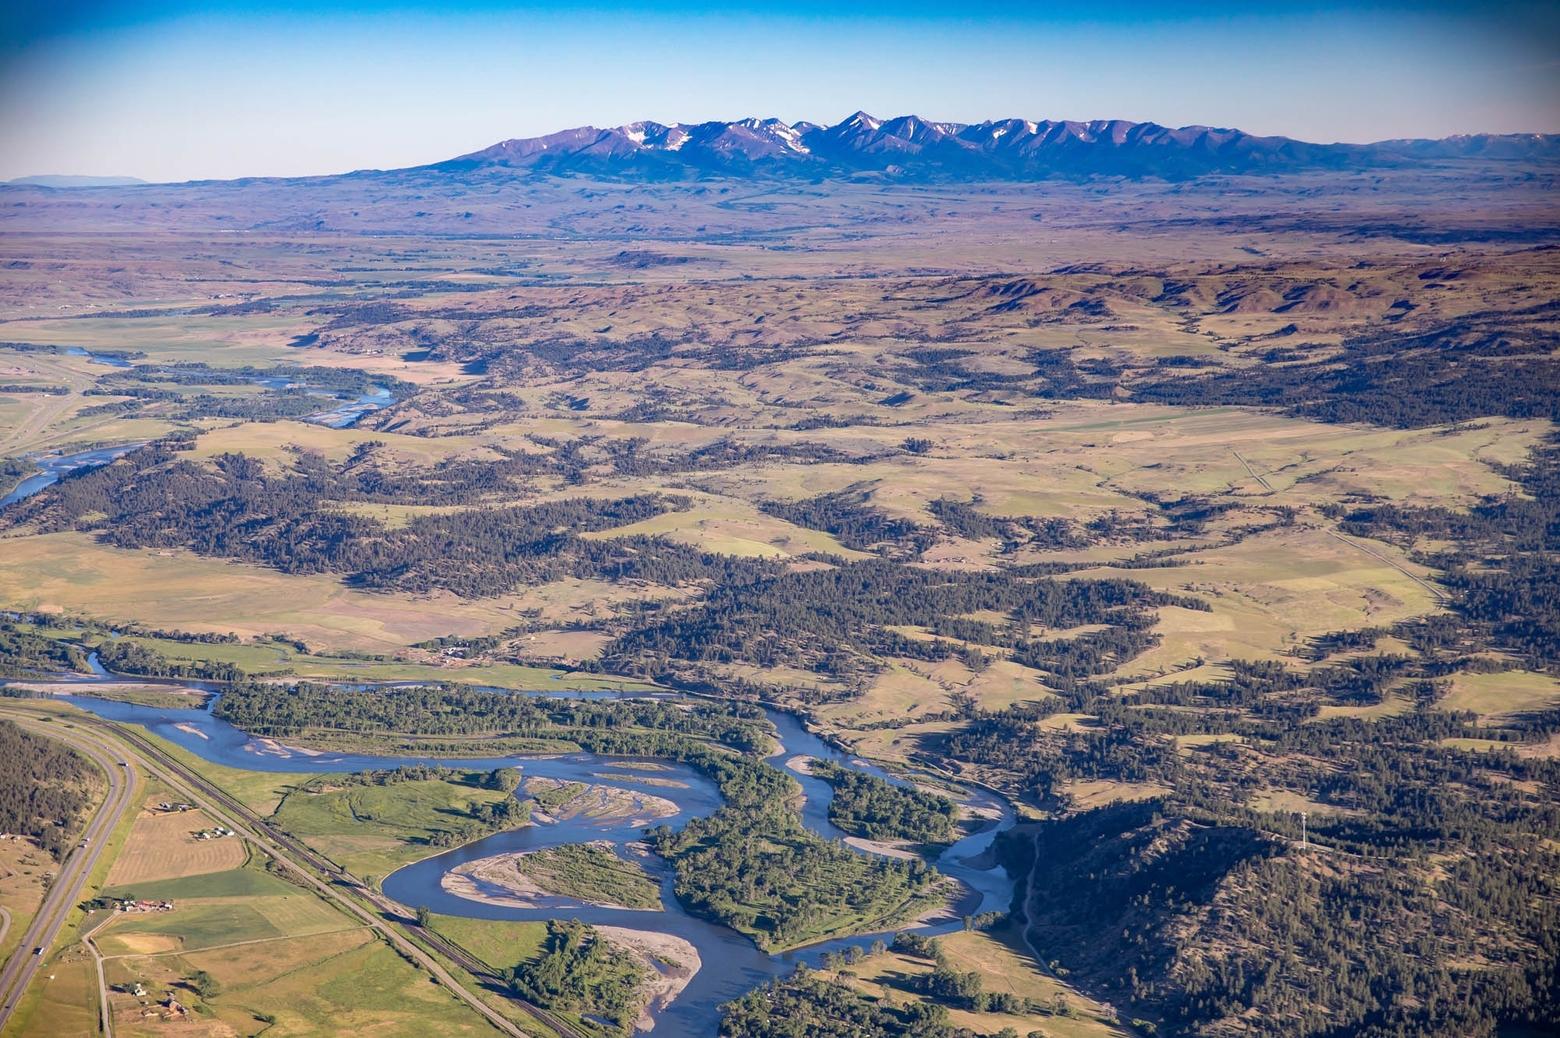 Crazy Mountains yonder, the Yellowstone River wends its way through a rich riparian corridor and island habitat that has not been seriously manipulated by humans.